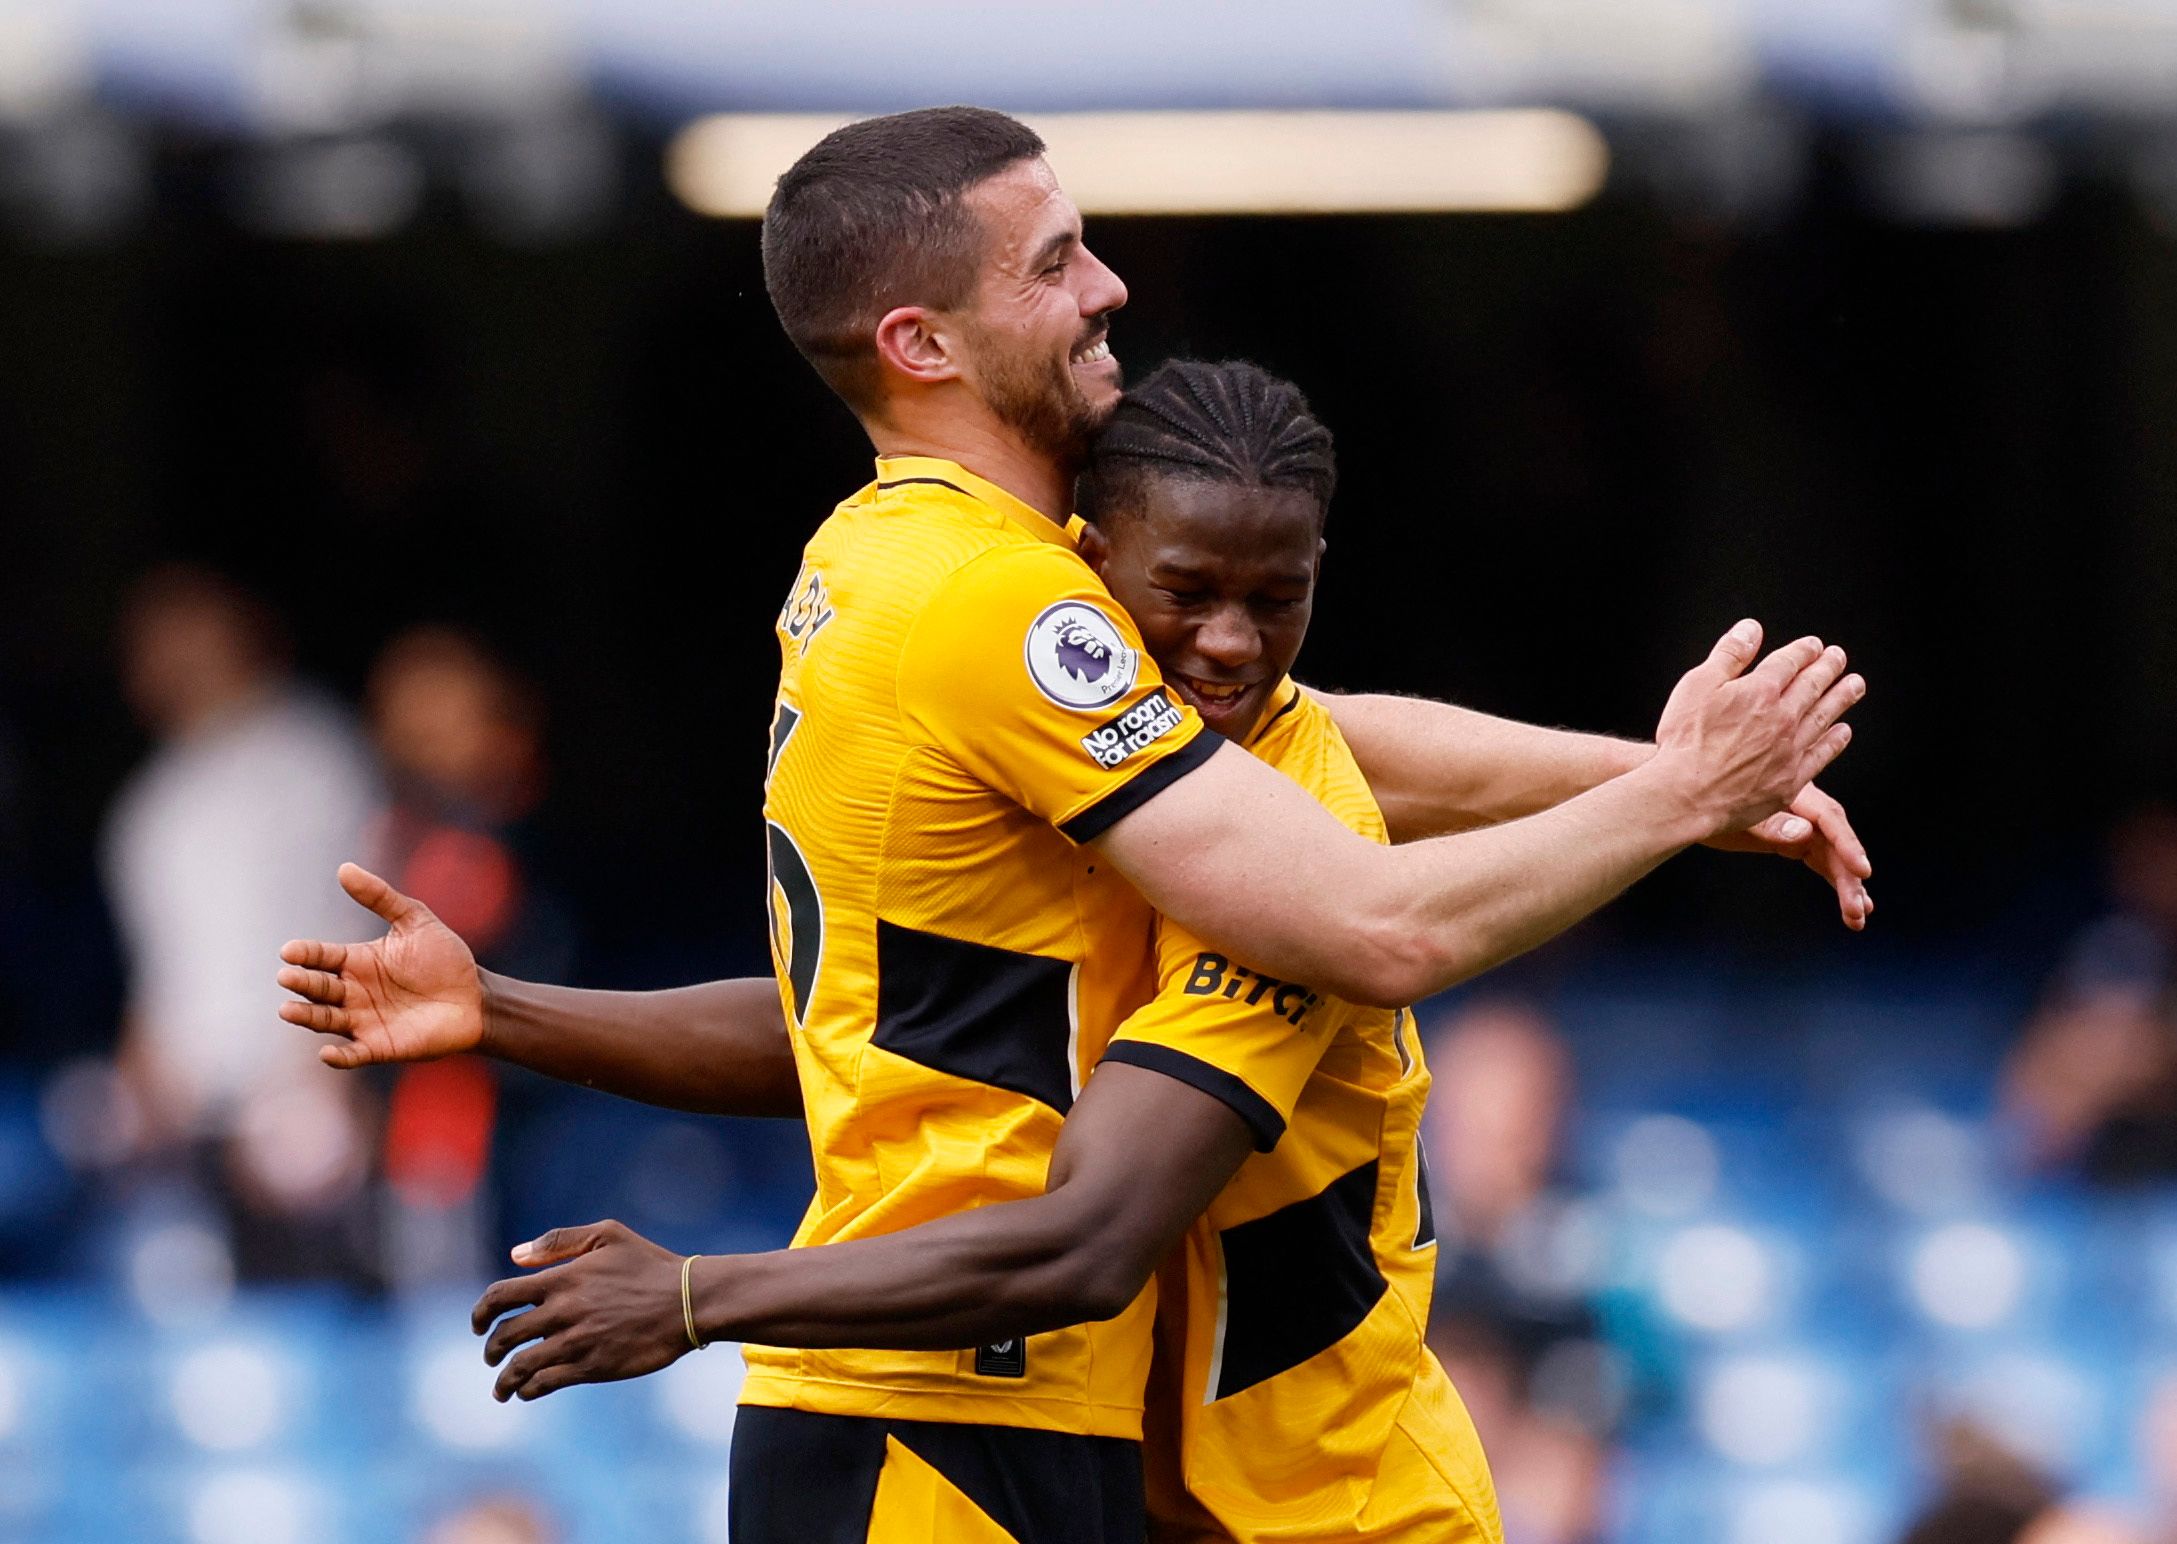 Soccer Football - Premier League - Chelsea v Wolverhampton Wanderers - Stamford Bridge, London, Britain - May 7, 2022 Wolverhampton Wanderers' Conor Coady celebrates with Chiquinho after the match Action Images via Reuters/Andrew Couldridge EDITORIAL USE ONLY. No use with unauthorized audio, video, data, fixture lists, club/league logos or 'live' services. Online in-match use limited to 75 images, no video emulation. No use in betting, games or single club /league/player publications.  Please co